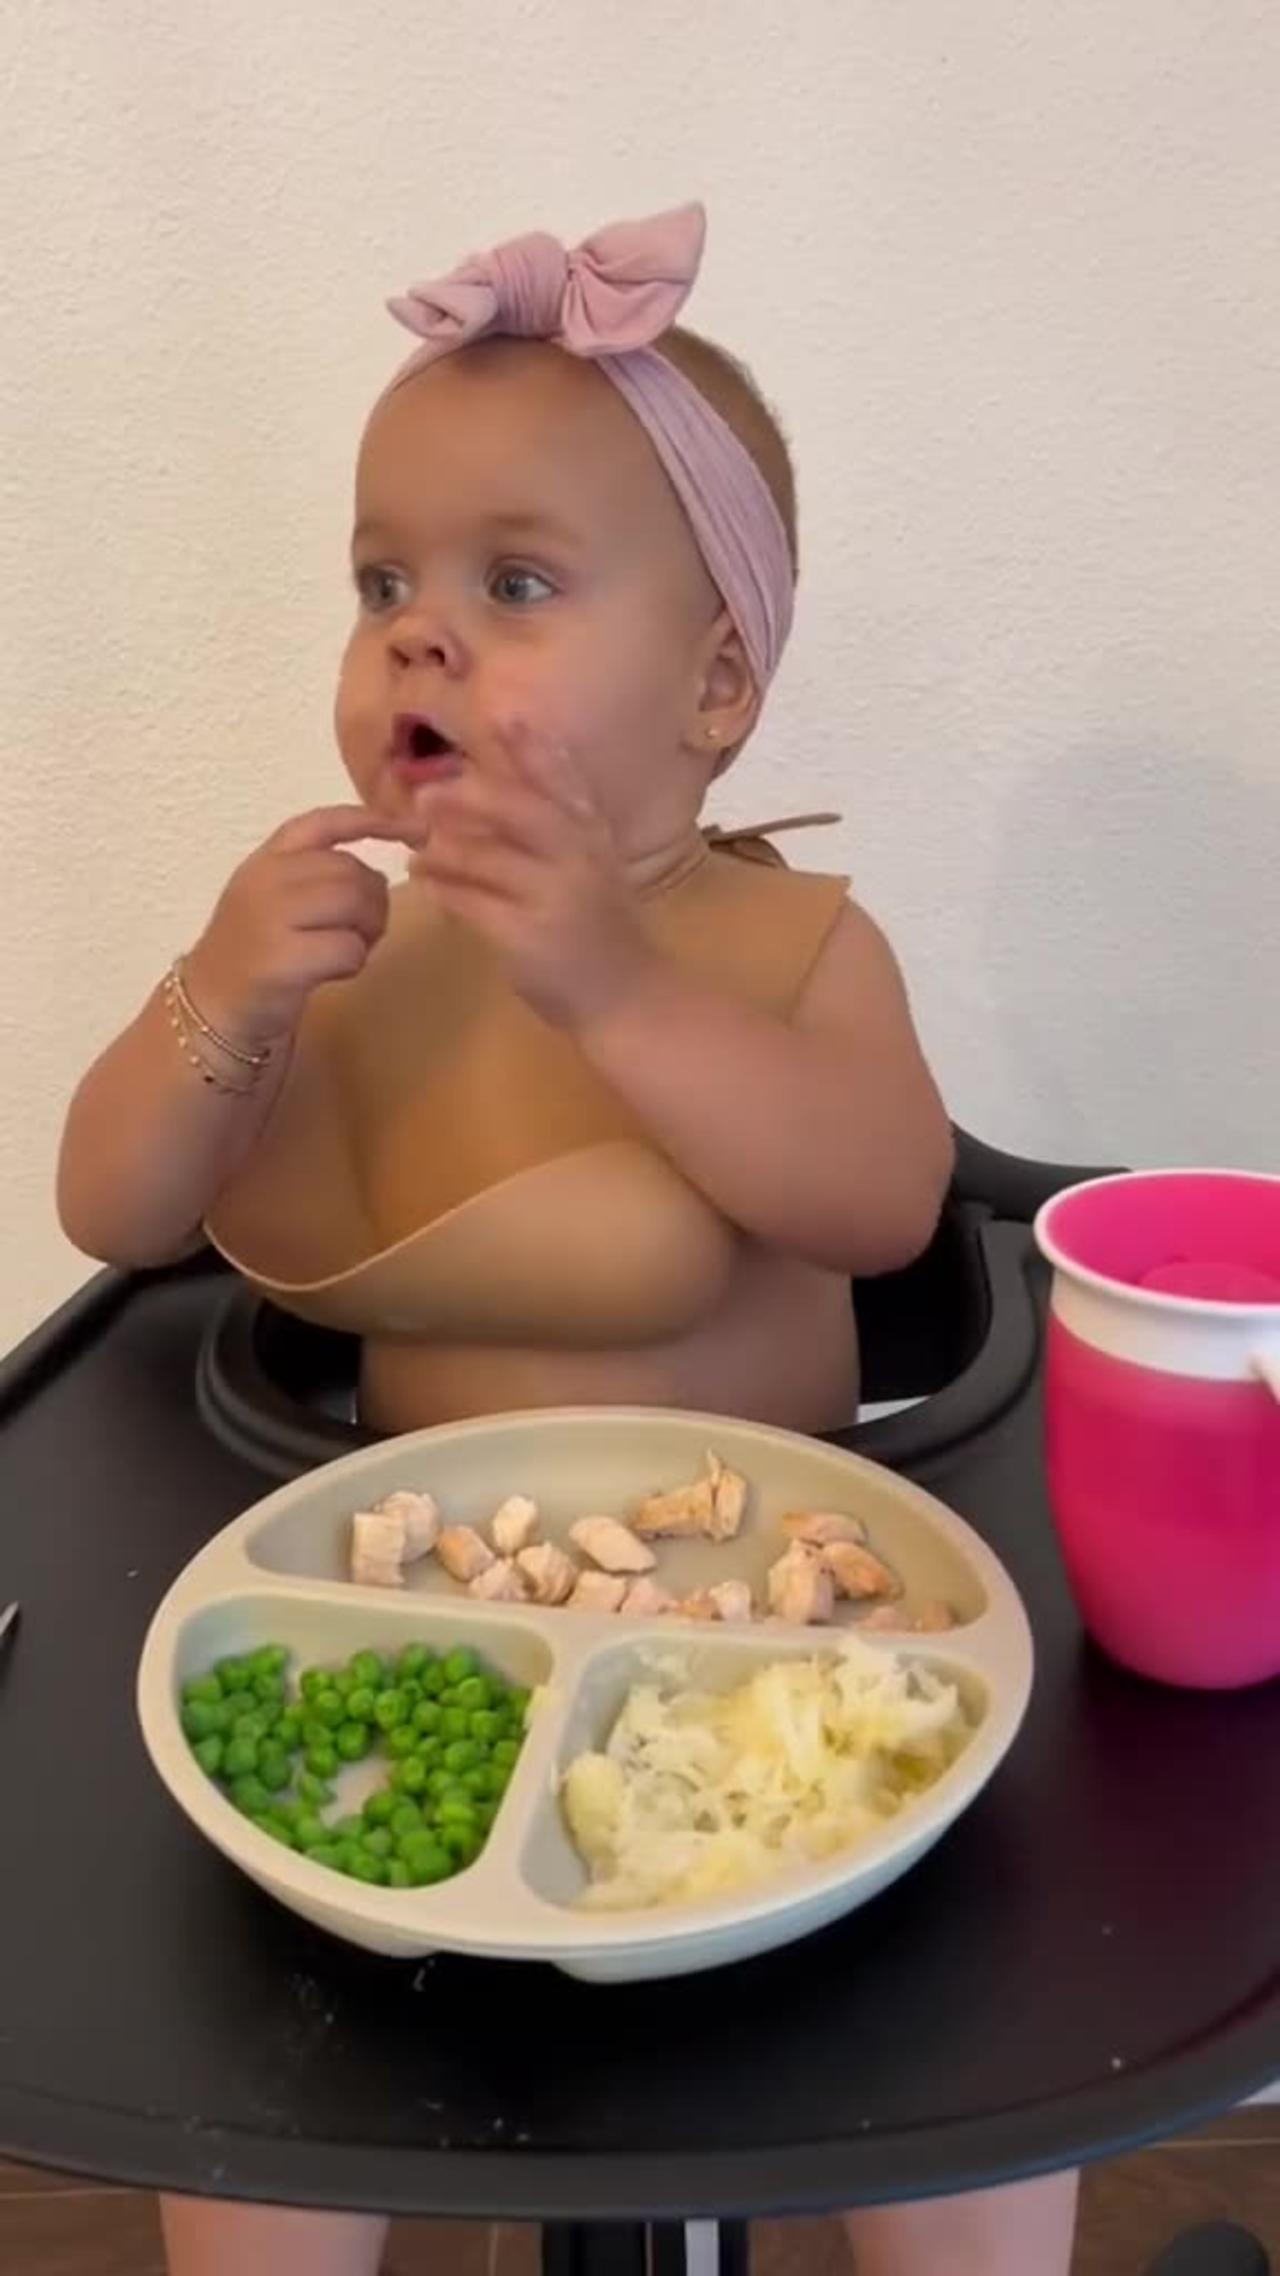 Babe Eating | Cute Babe | Beautiful baby | Baby food | new born baby